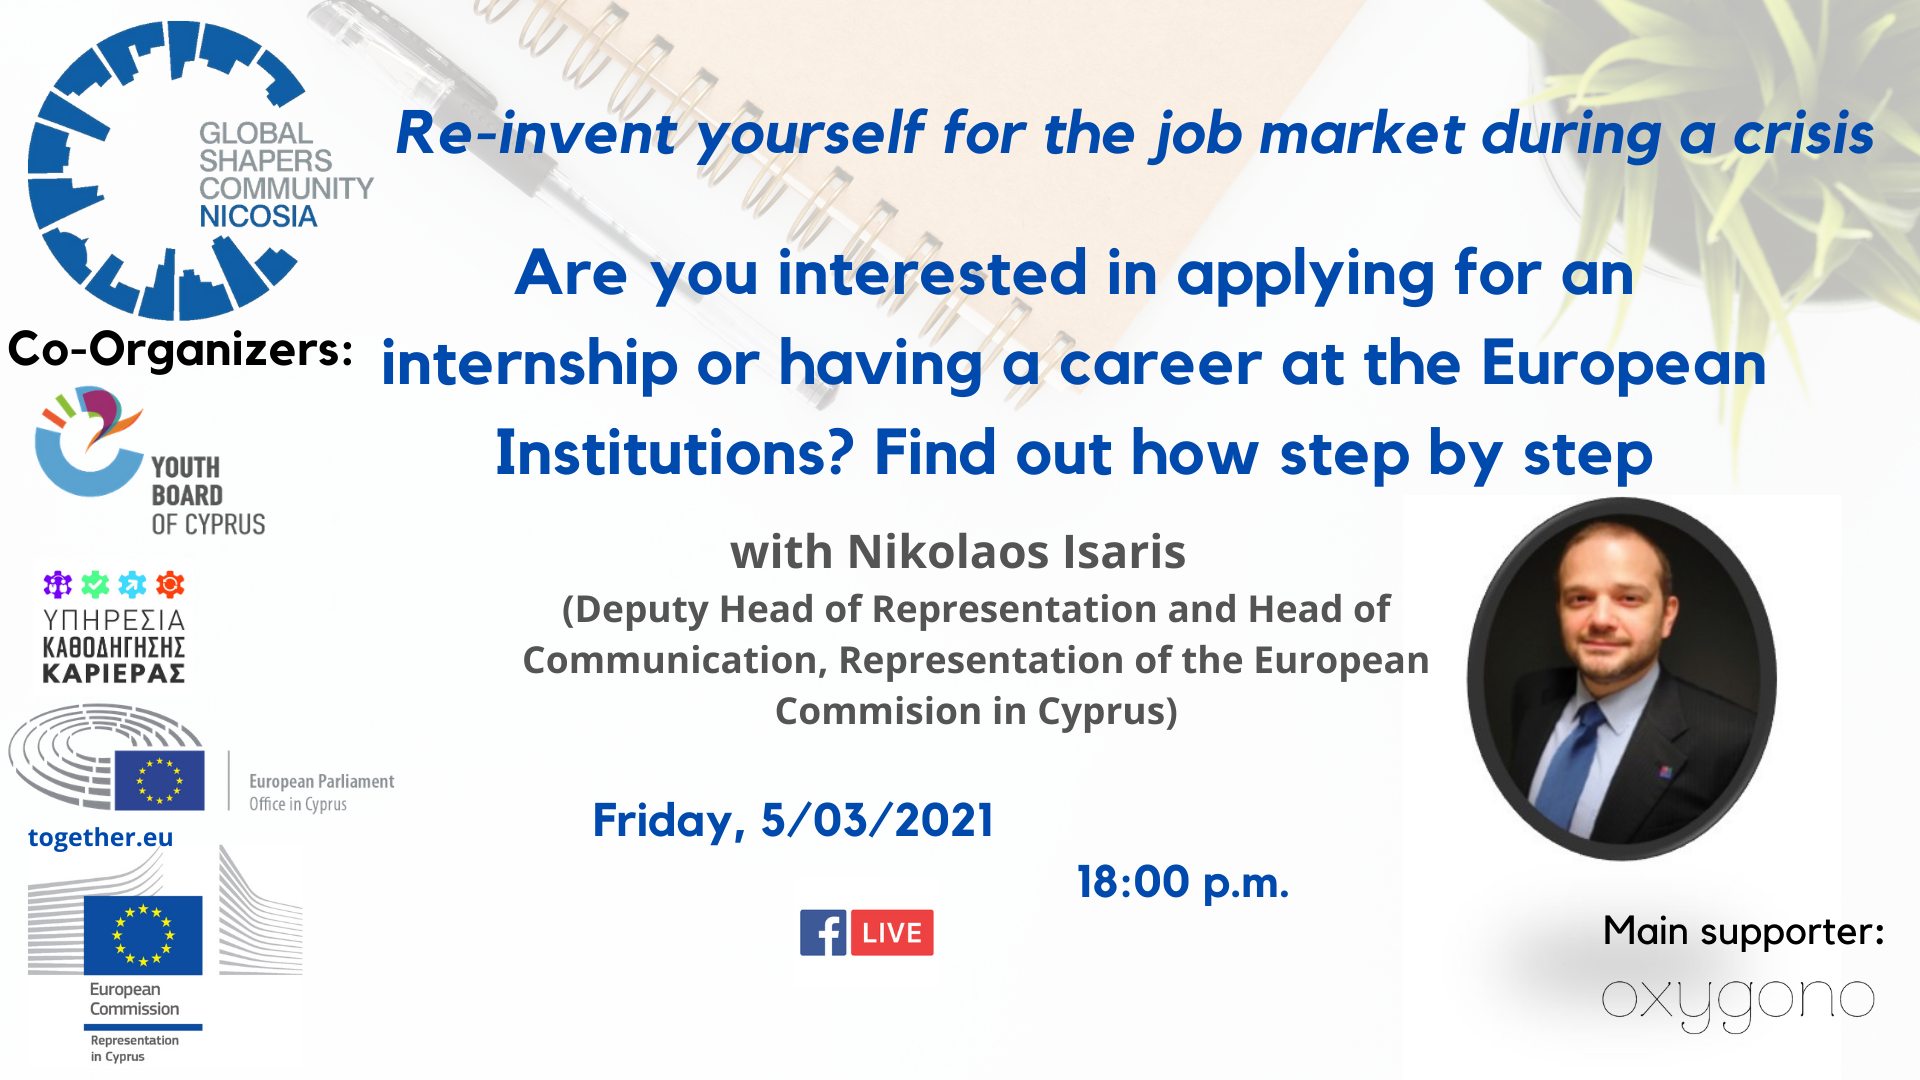 Are you interested in applying for an internship or having a career at the European Institutions? Find out how step by step